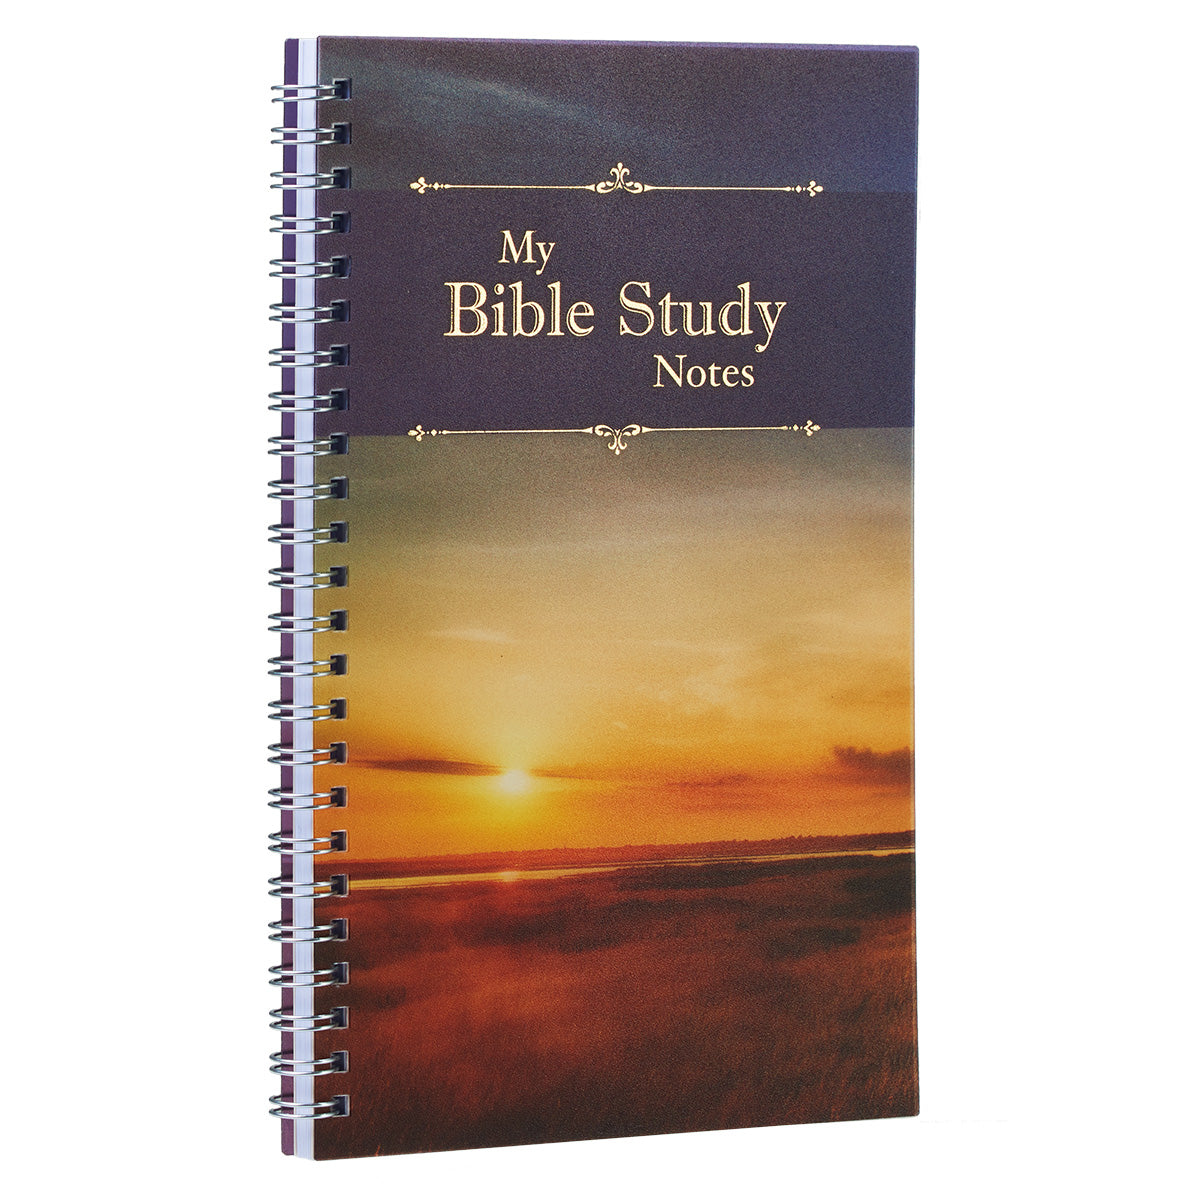 My Bible Study Notes Wirebound Notebook - The Christian Gift Company